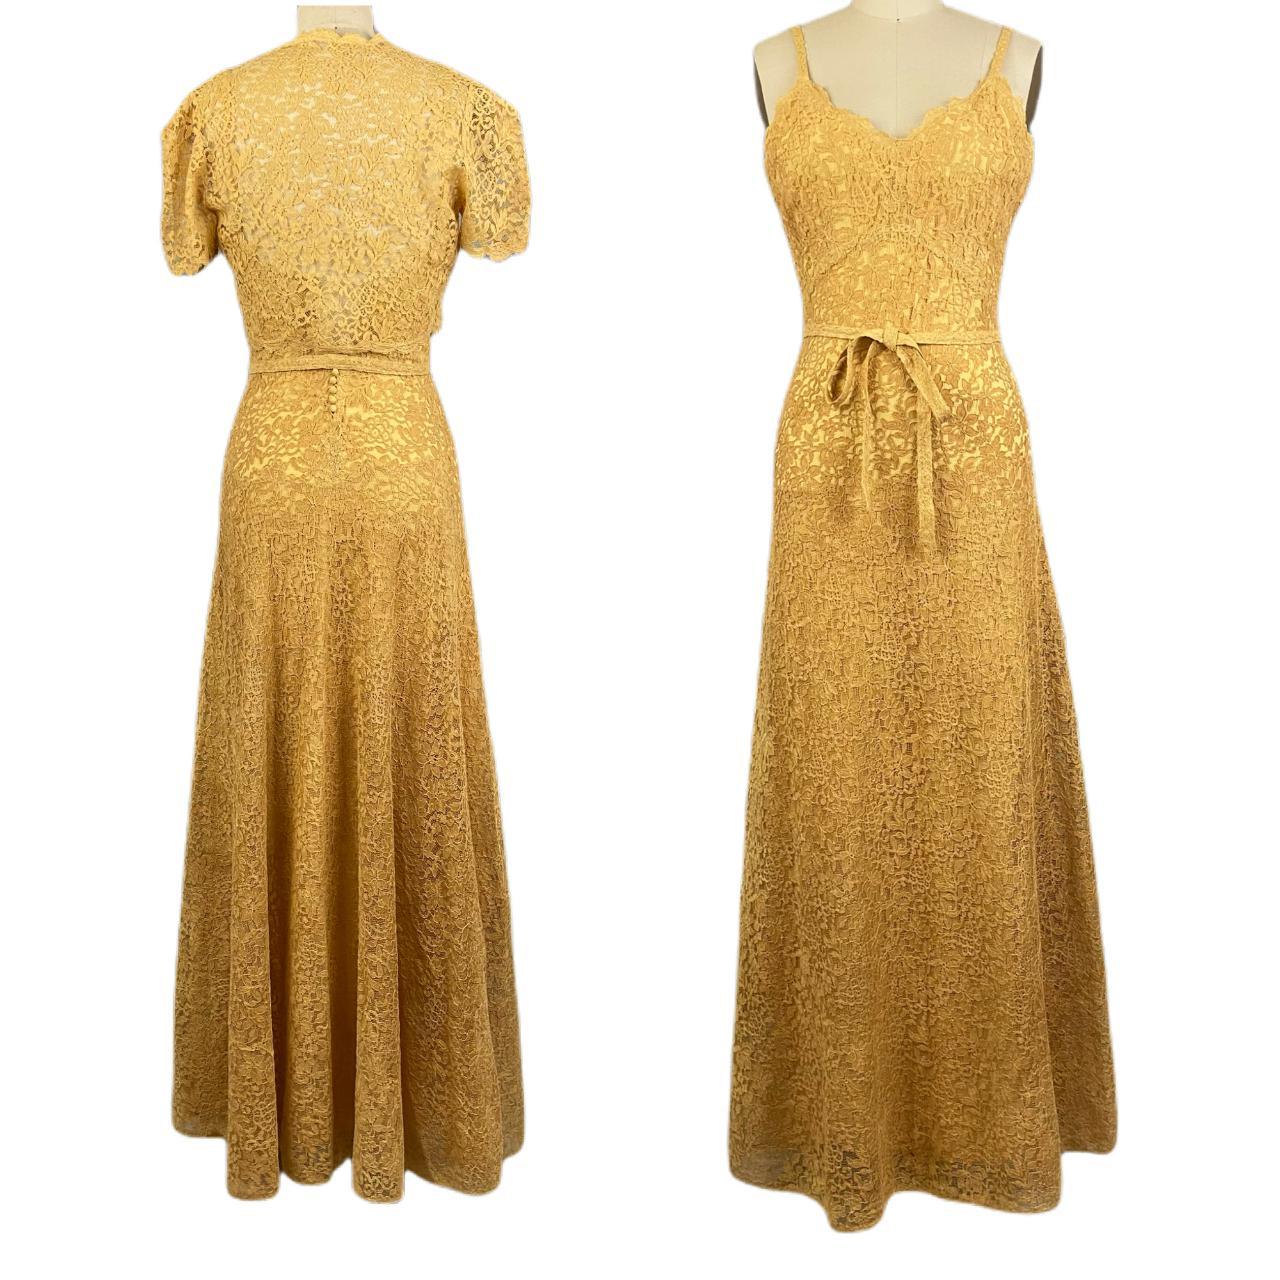 Product Image 3 - Incredible vintage 1930s golden yellow